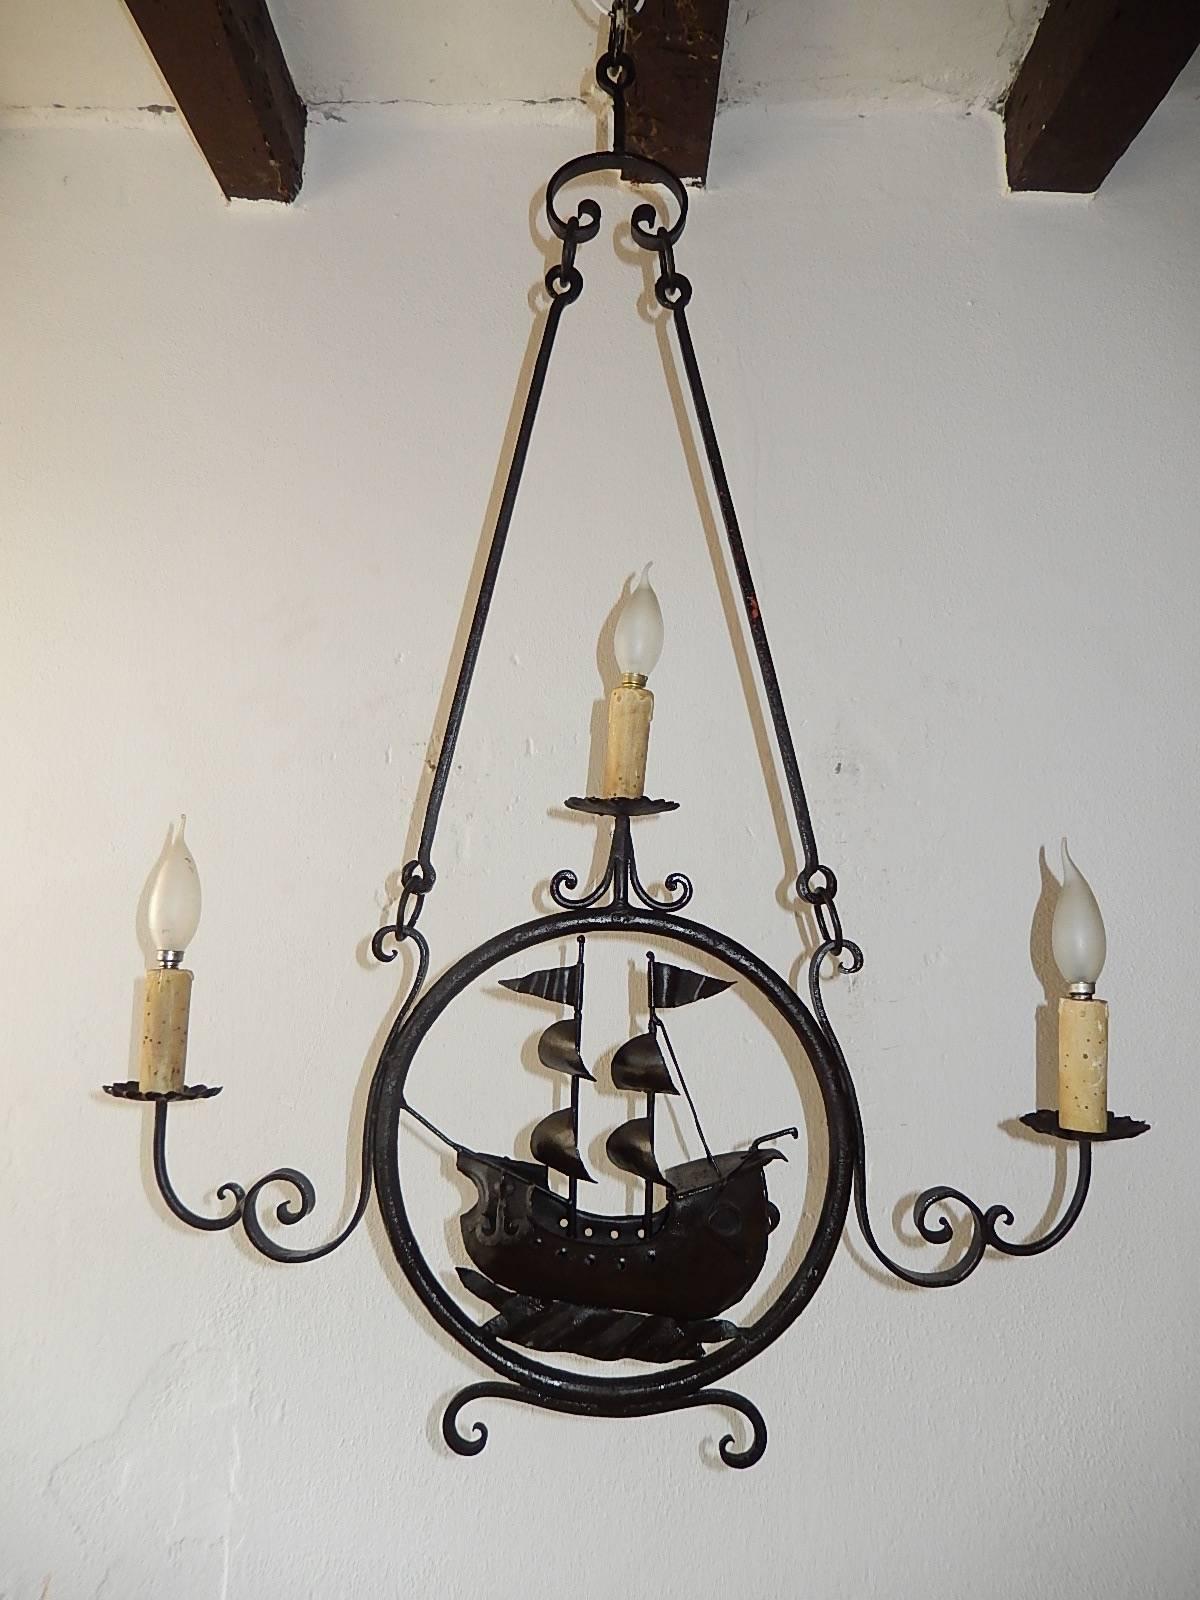 Housing 3 lights.  Handmade ship with sails, water and even an anchor.  Re-wired and ready to hang.  Free priority shipping from Italy.